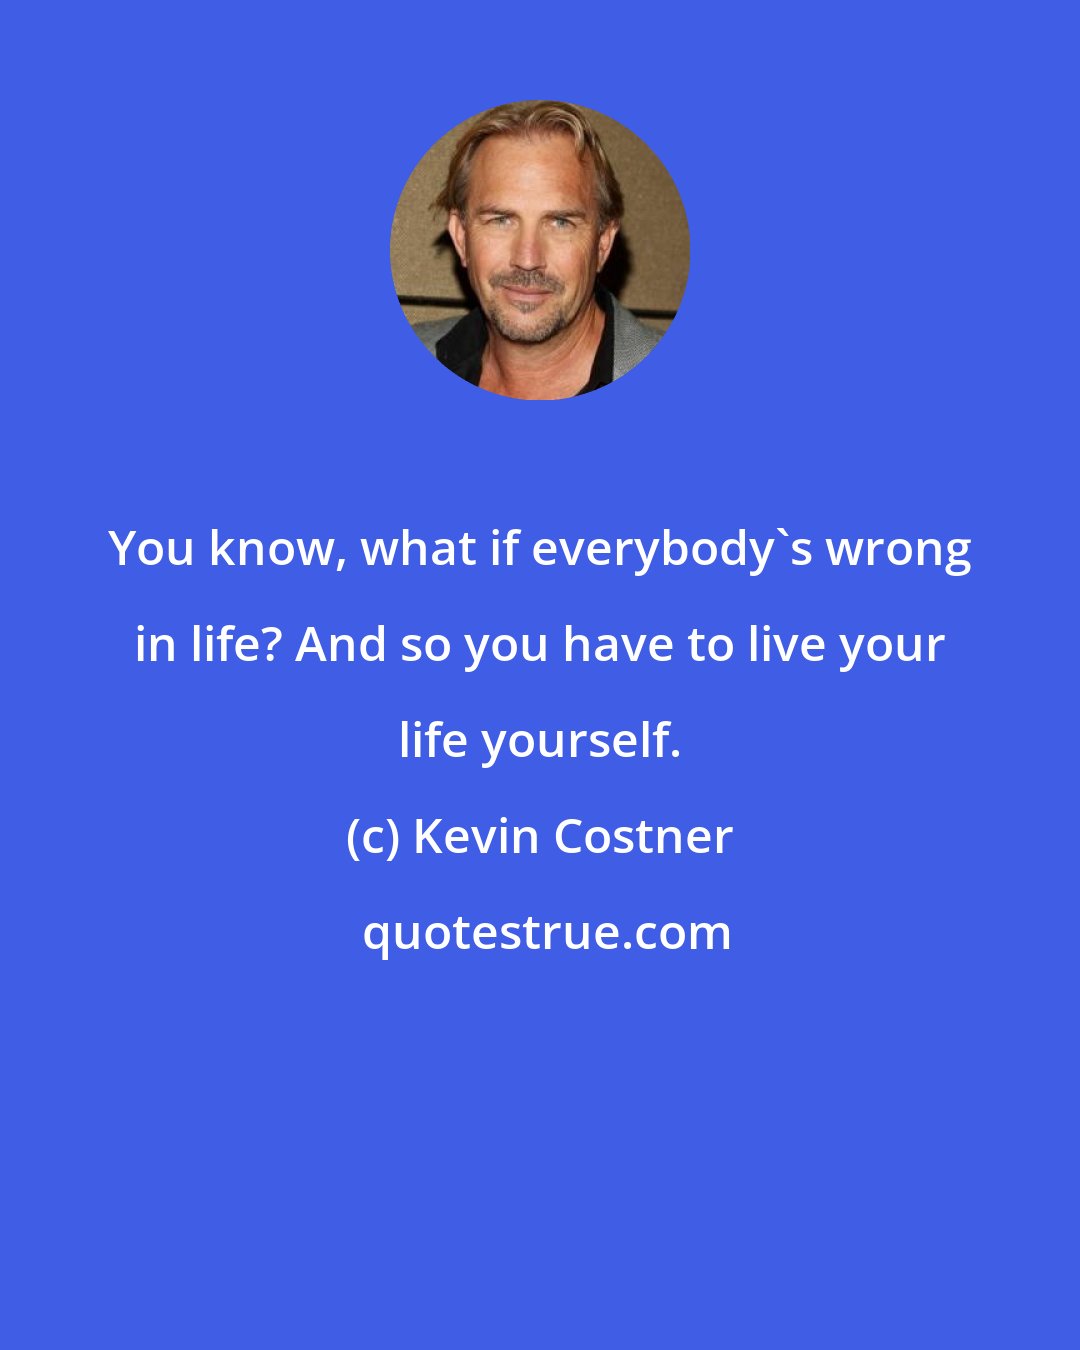 Kevin Costner: You know, what if everybody's wrong in life? And so you have to live your life yourself.